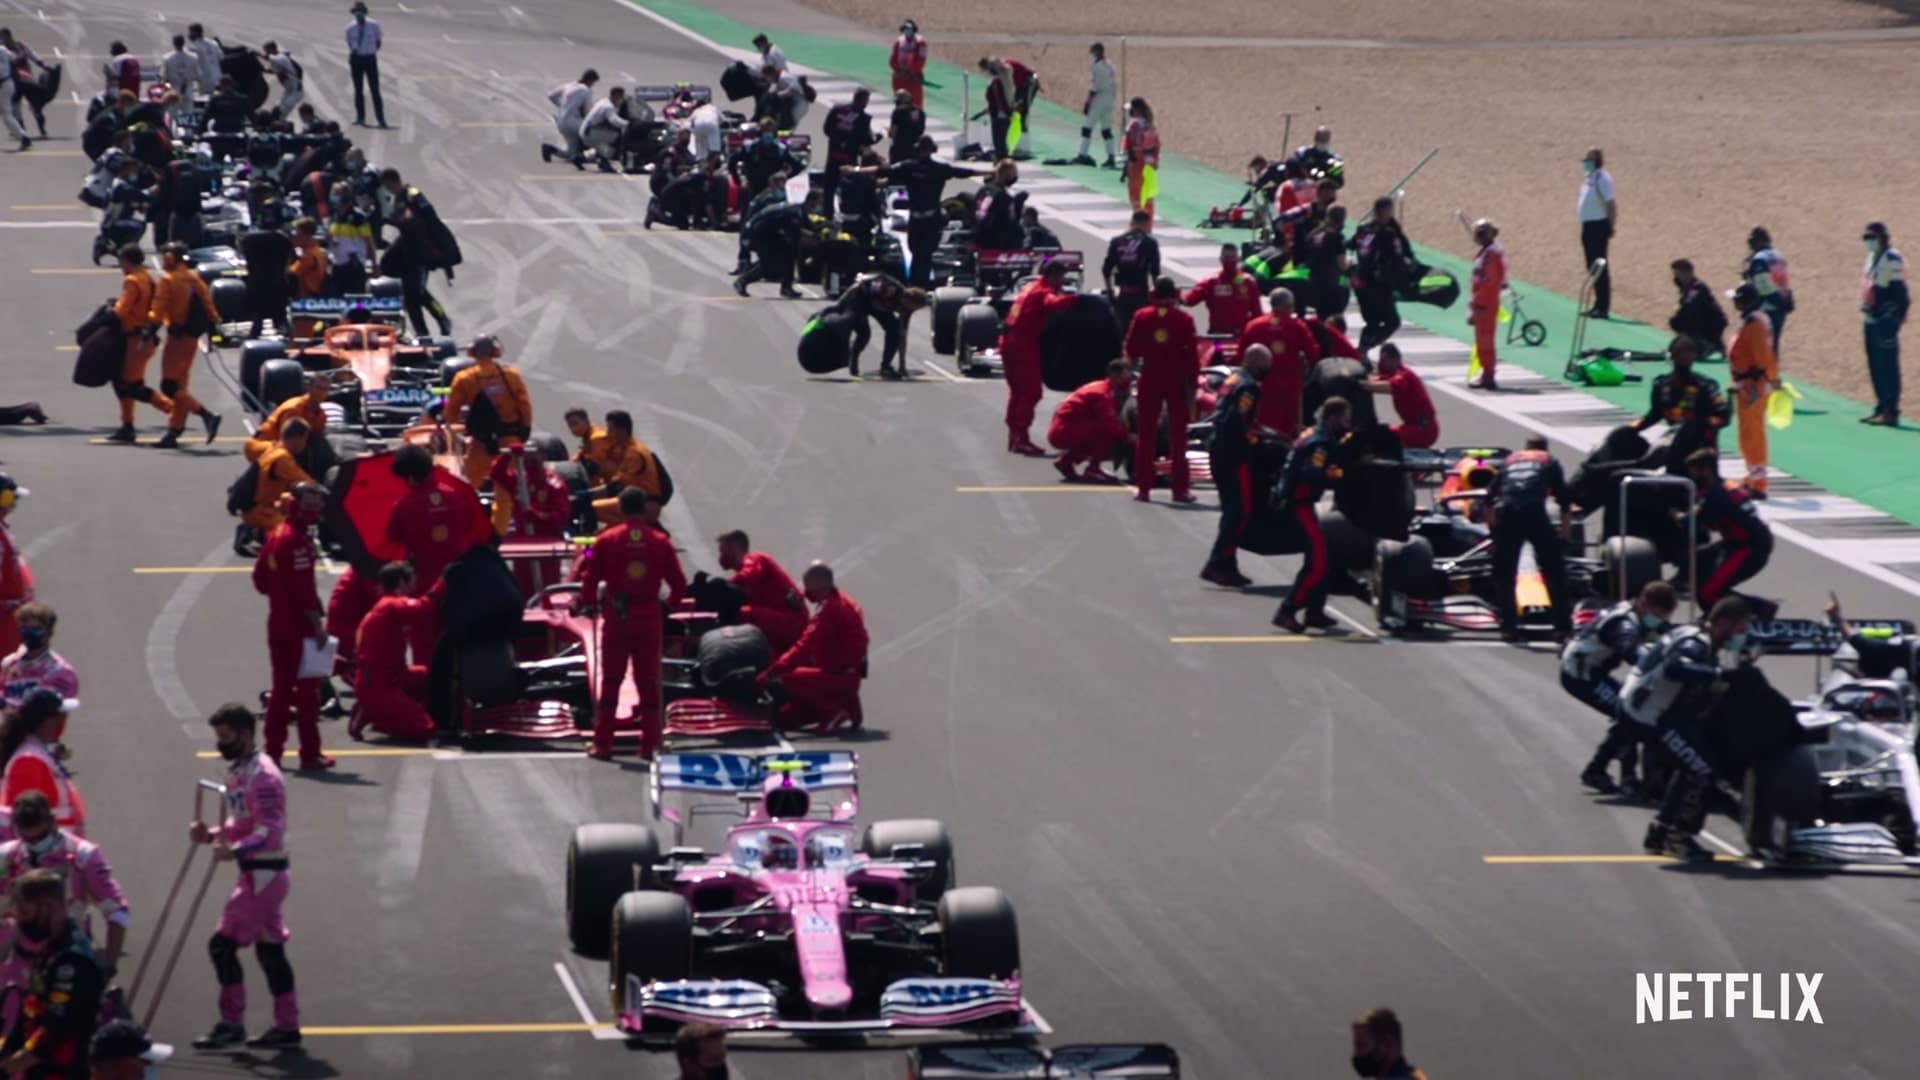 Netflix Formula 1 Drive to Survive Season 3 Trailer, Coming to Netflix in March 2021